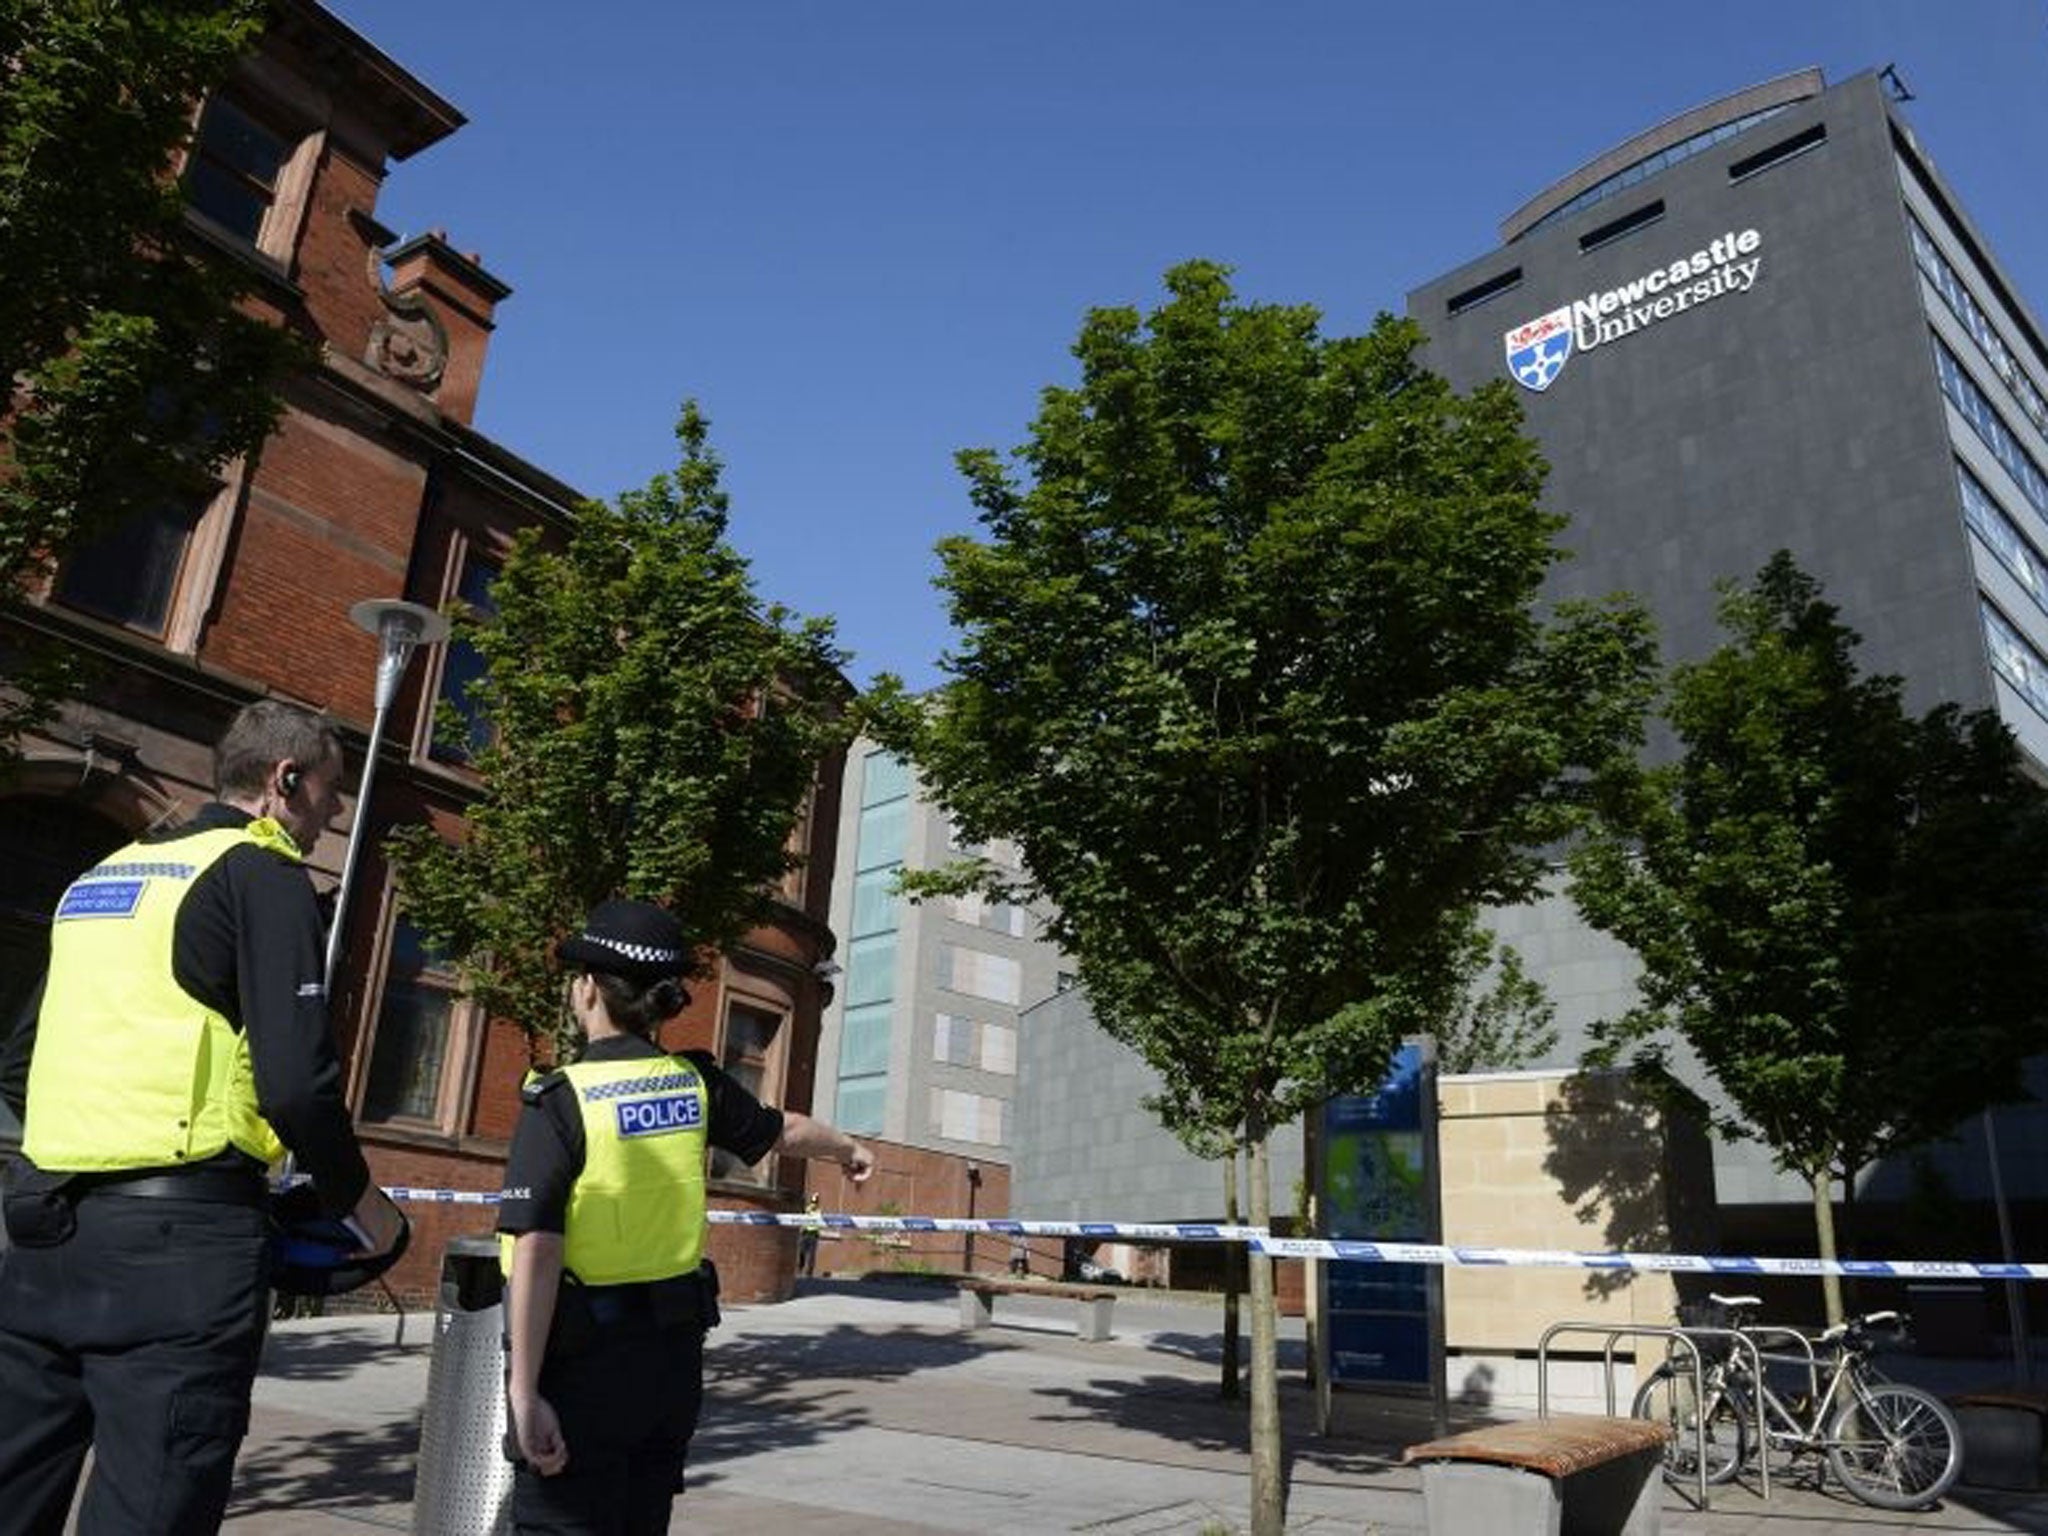 Police outside a Newcastle University building in Newcastle, after it was sealed off in connection with "suspicious items" found earlier this week. PRESS ASSOCIATION Photo. Picture date: Thursday June 12, 2014. Two 18-year-old Russian students studying at